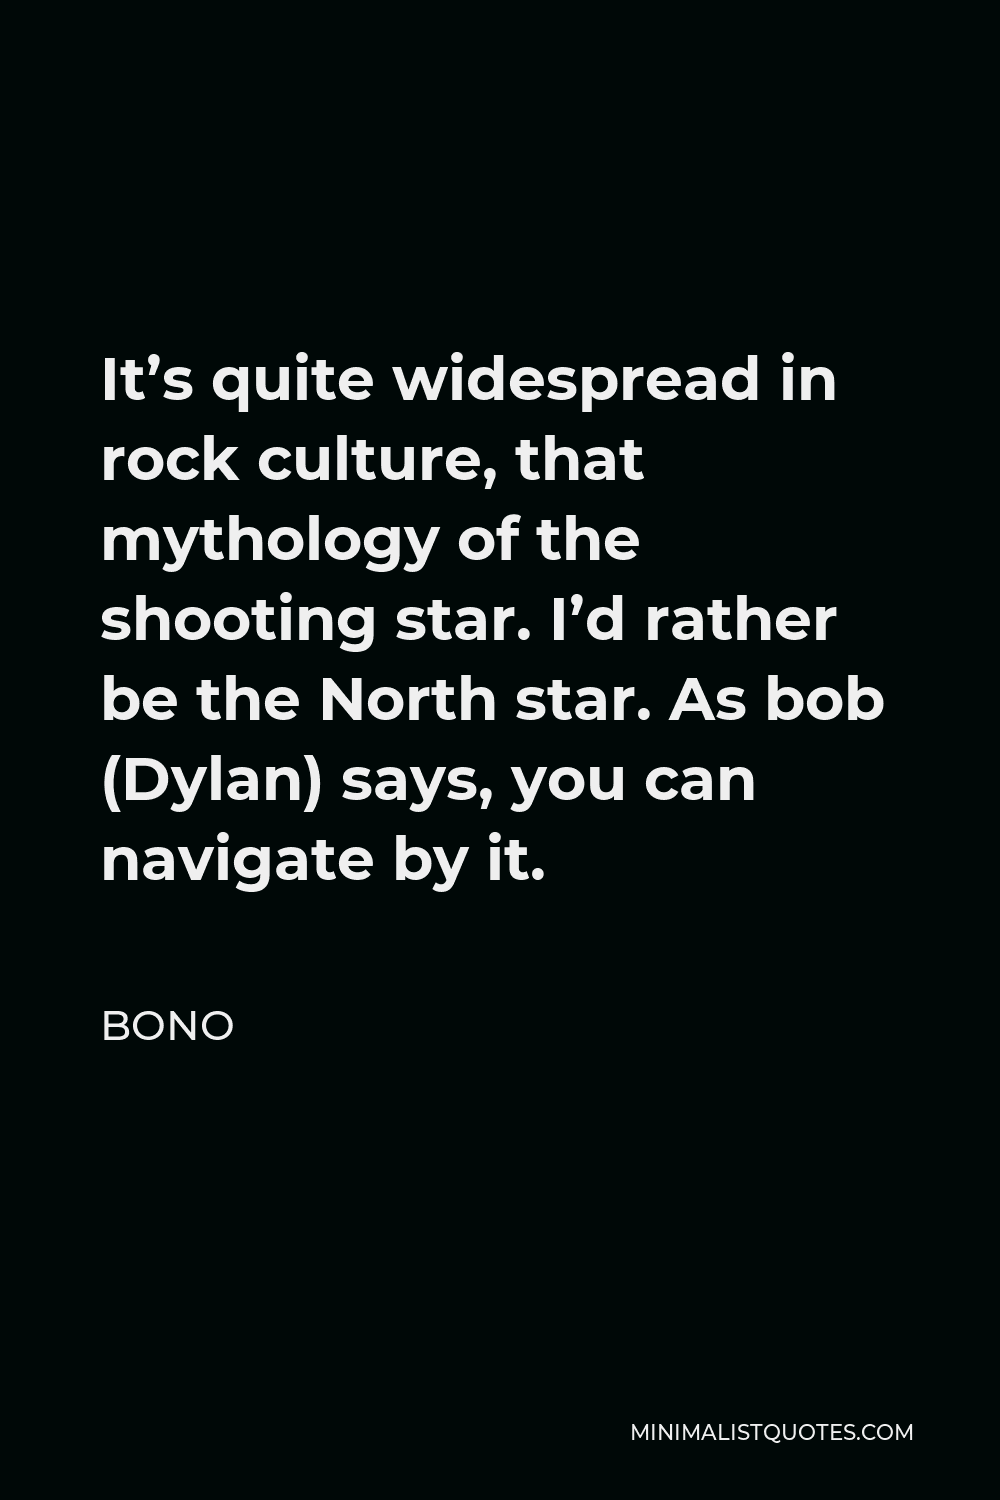 Bono Quote - It’s quite widespread in rock culture, that mythology of the shooting star. I’d rather be the North star. As bob (Dylan) says, you can navigate by it.